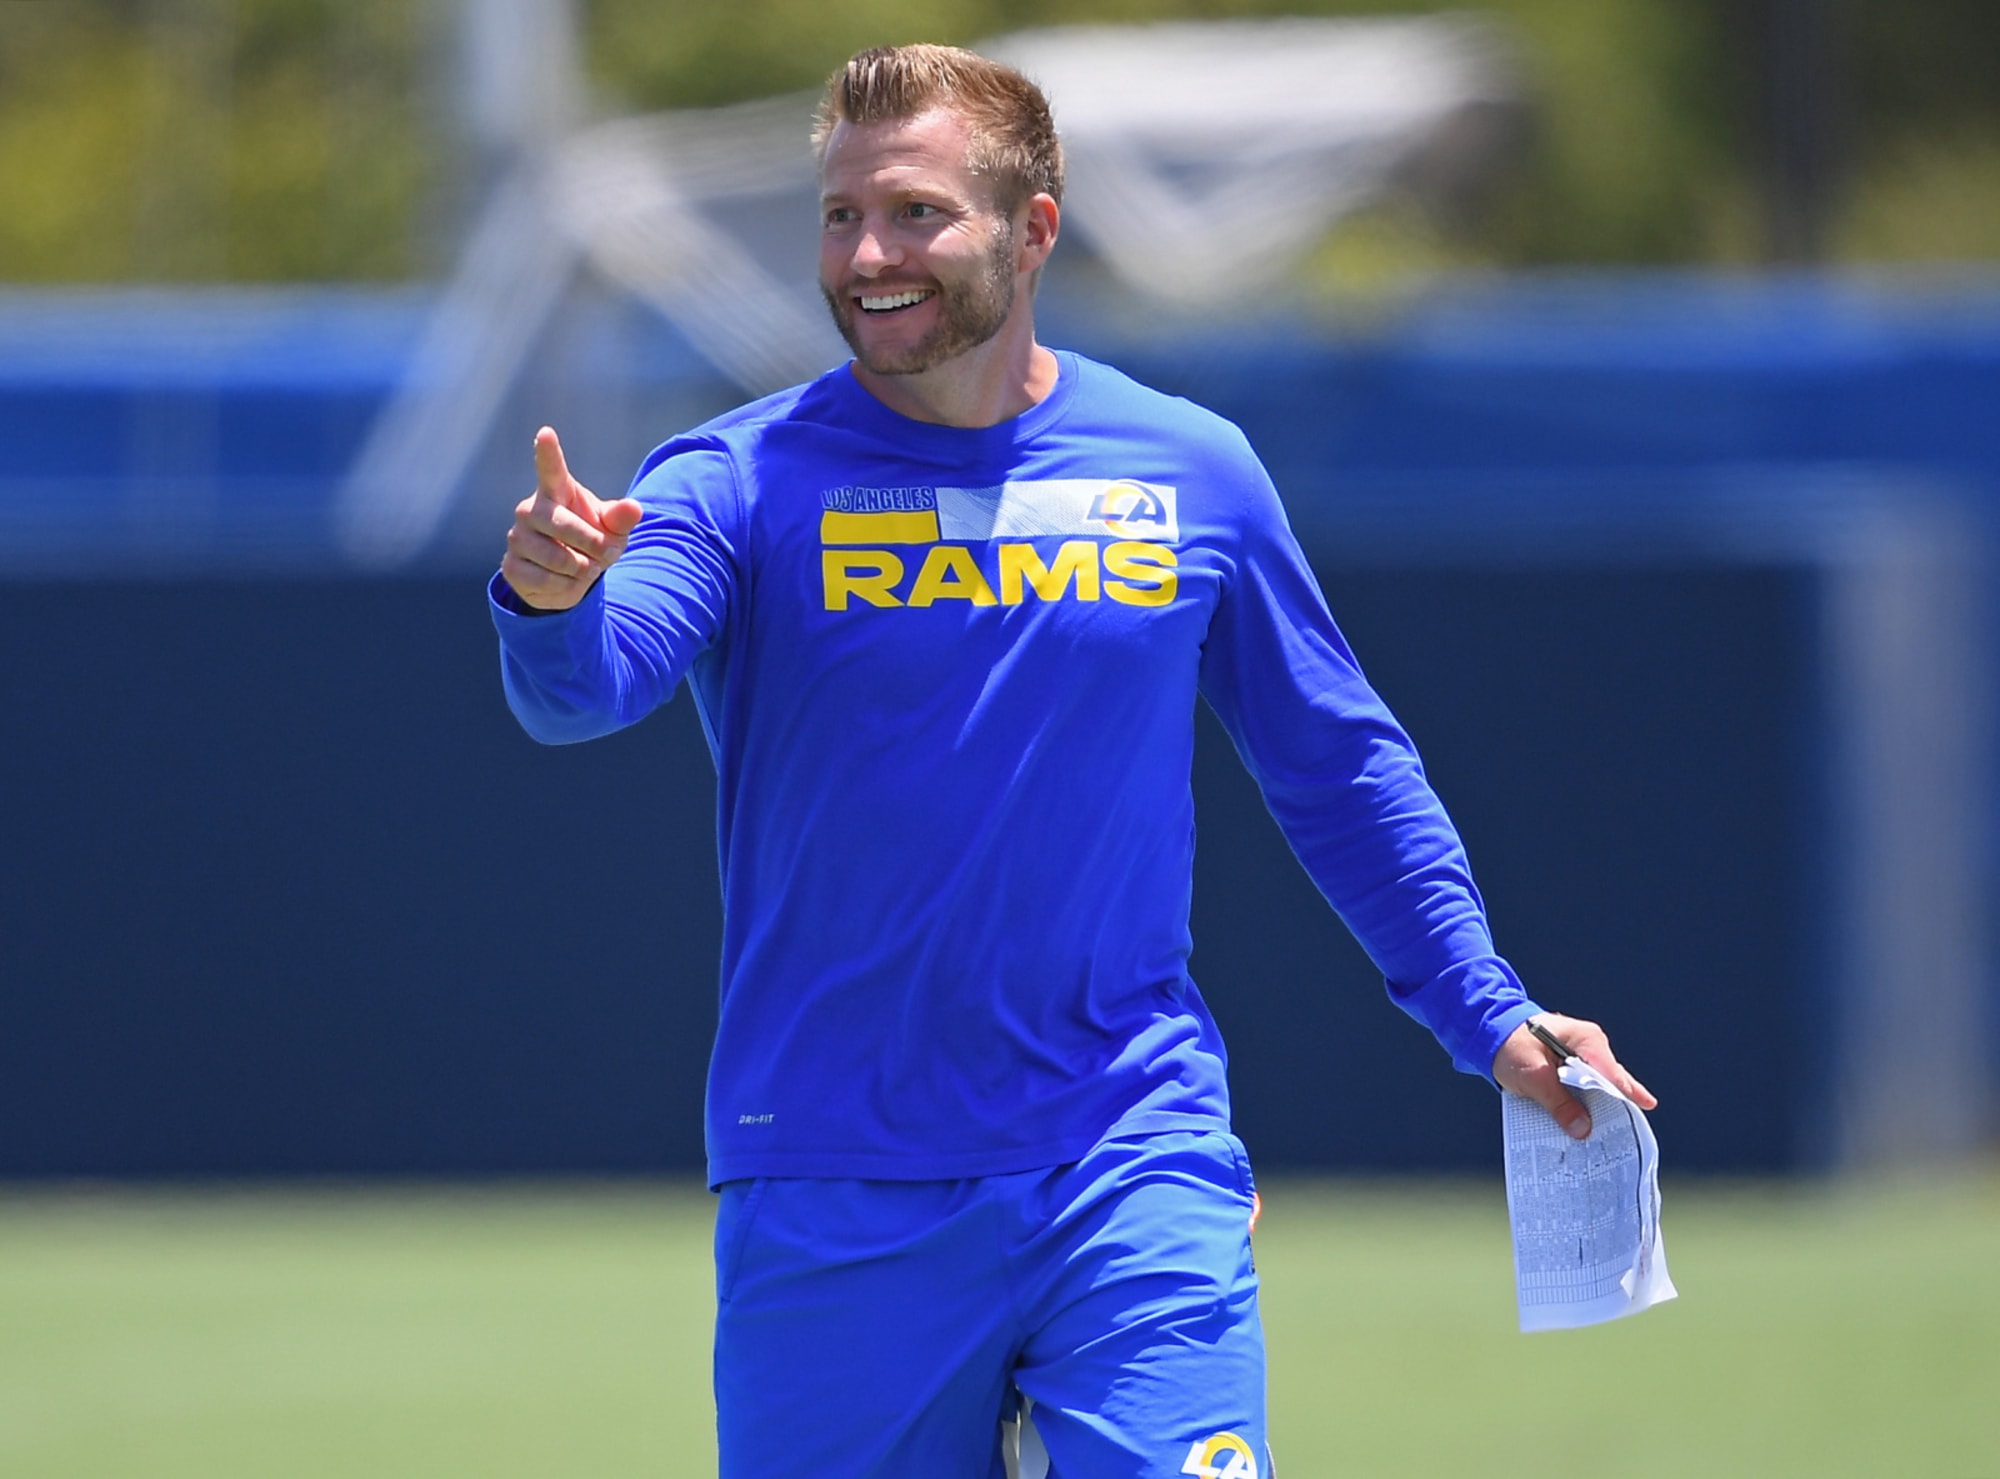 Sean McVay on OBJ just hours before signing announced